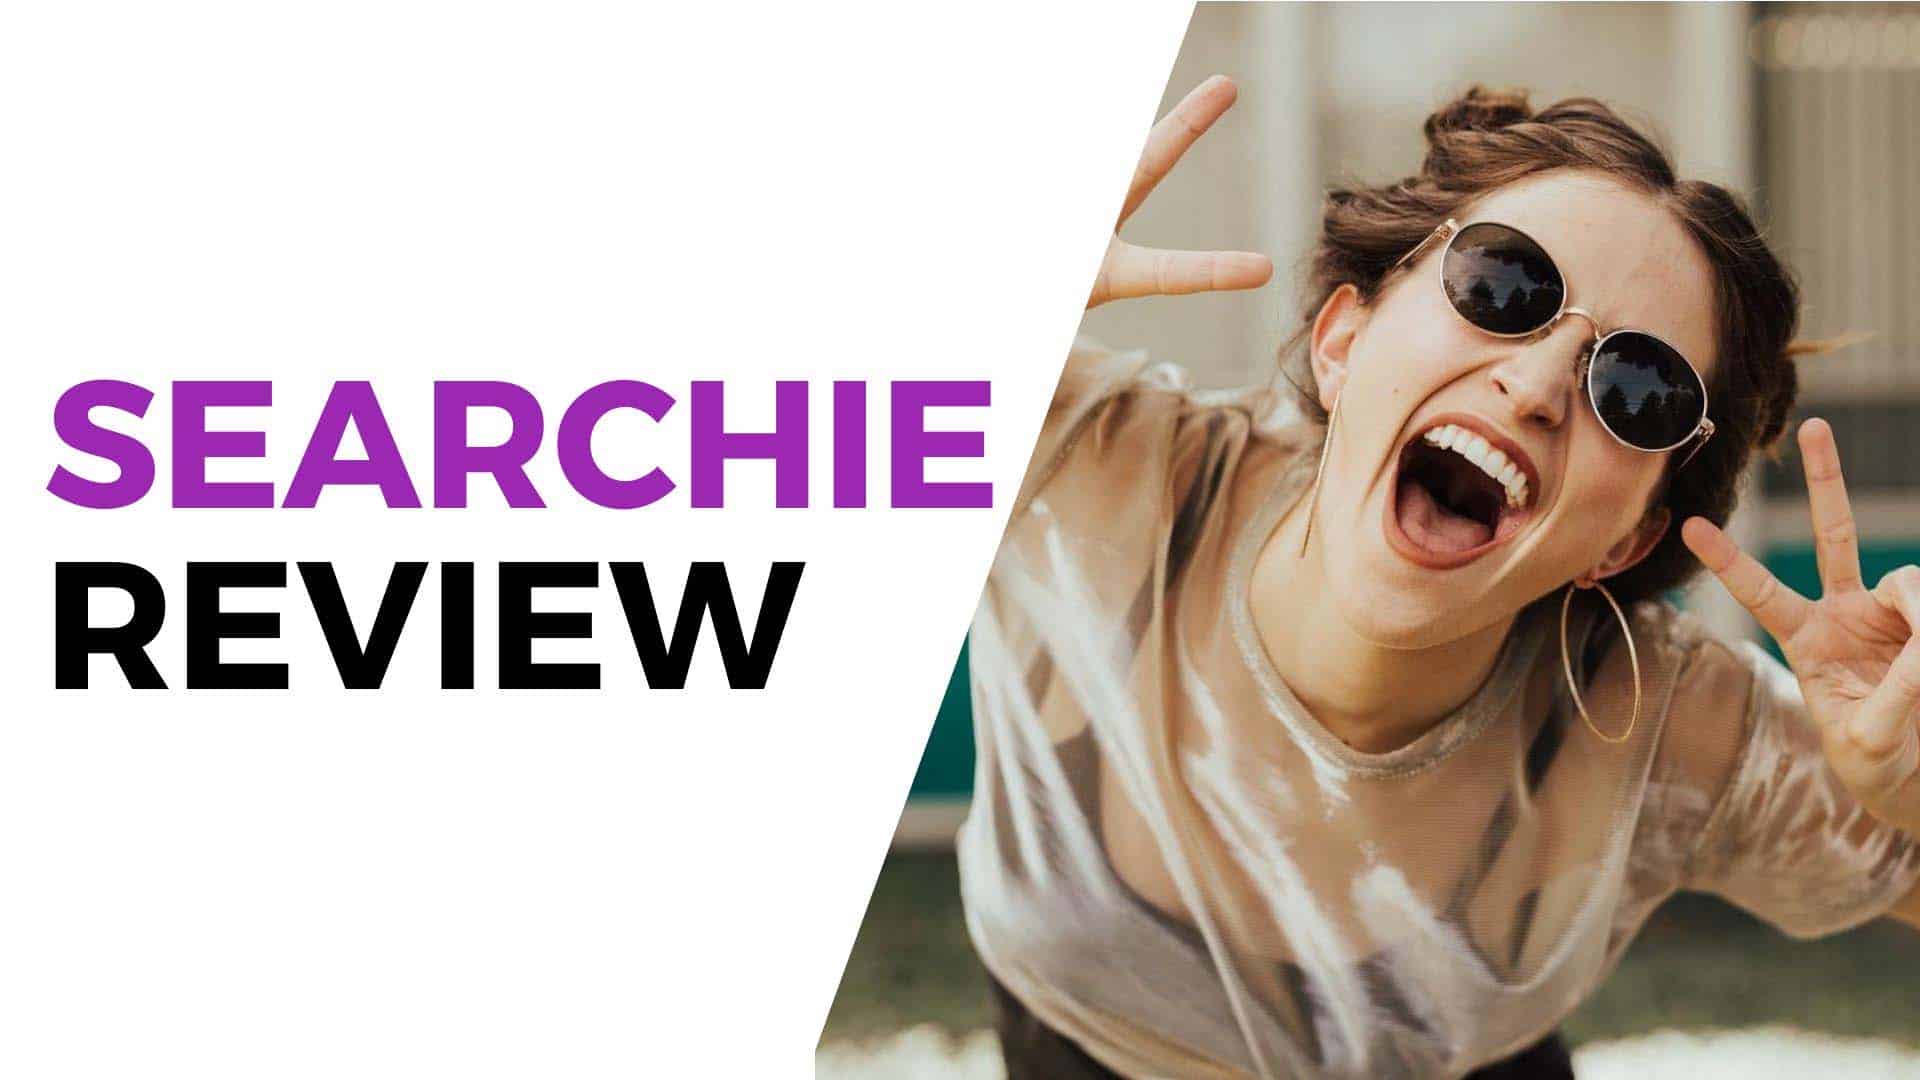 Searchie Review